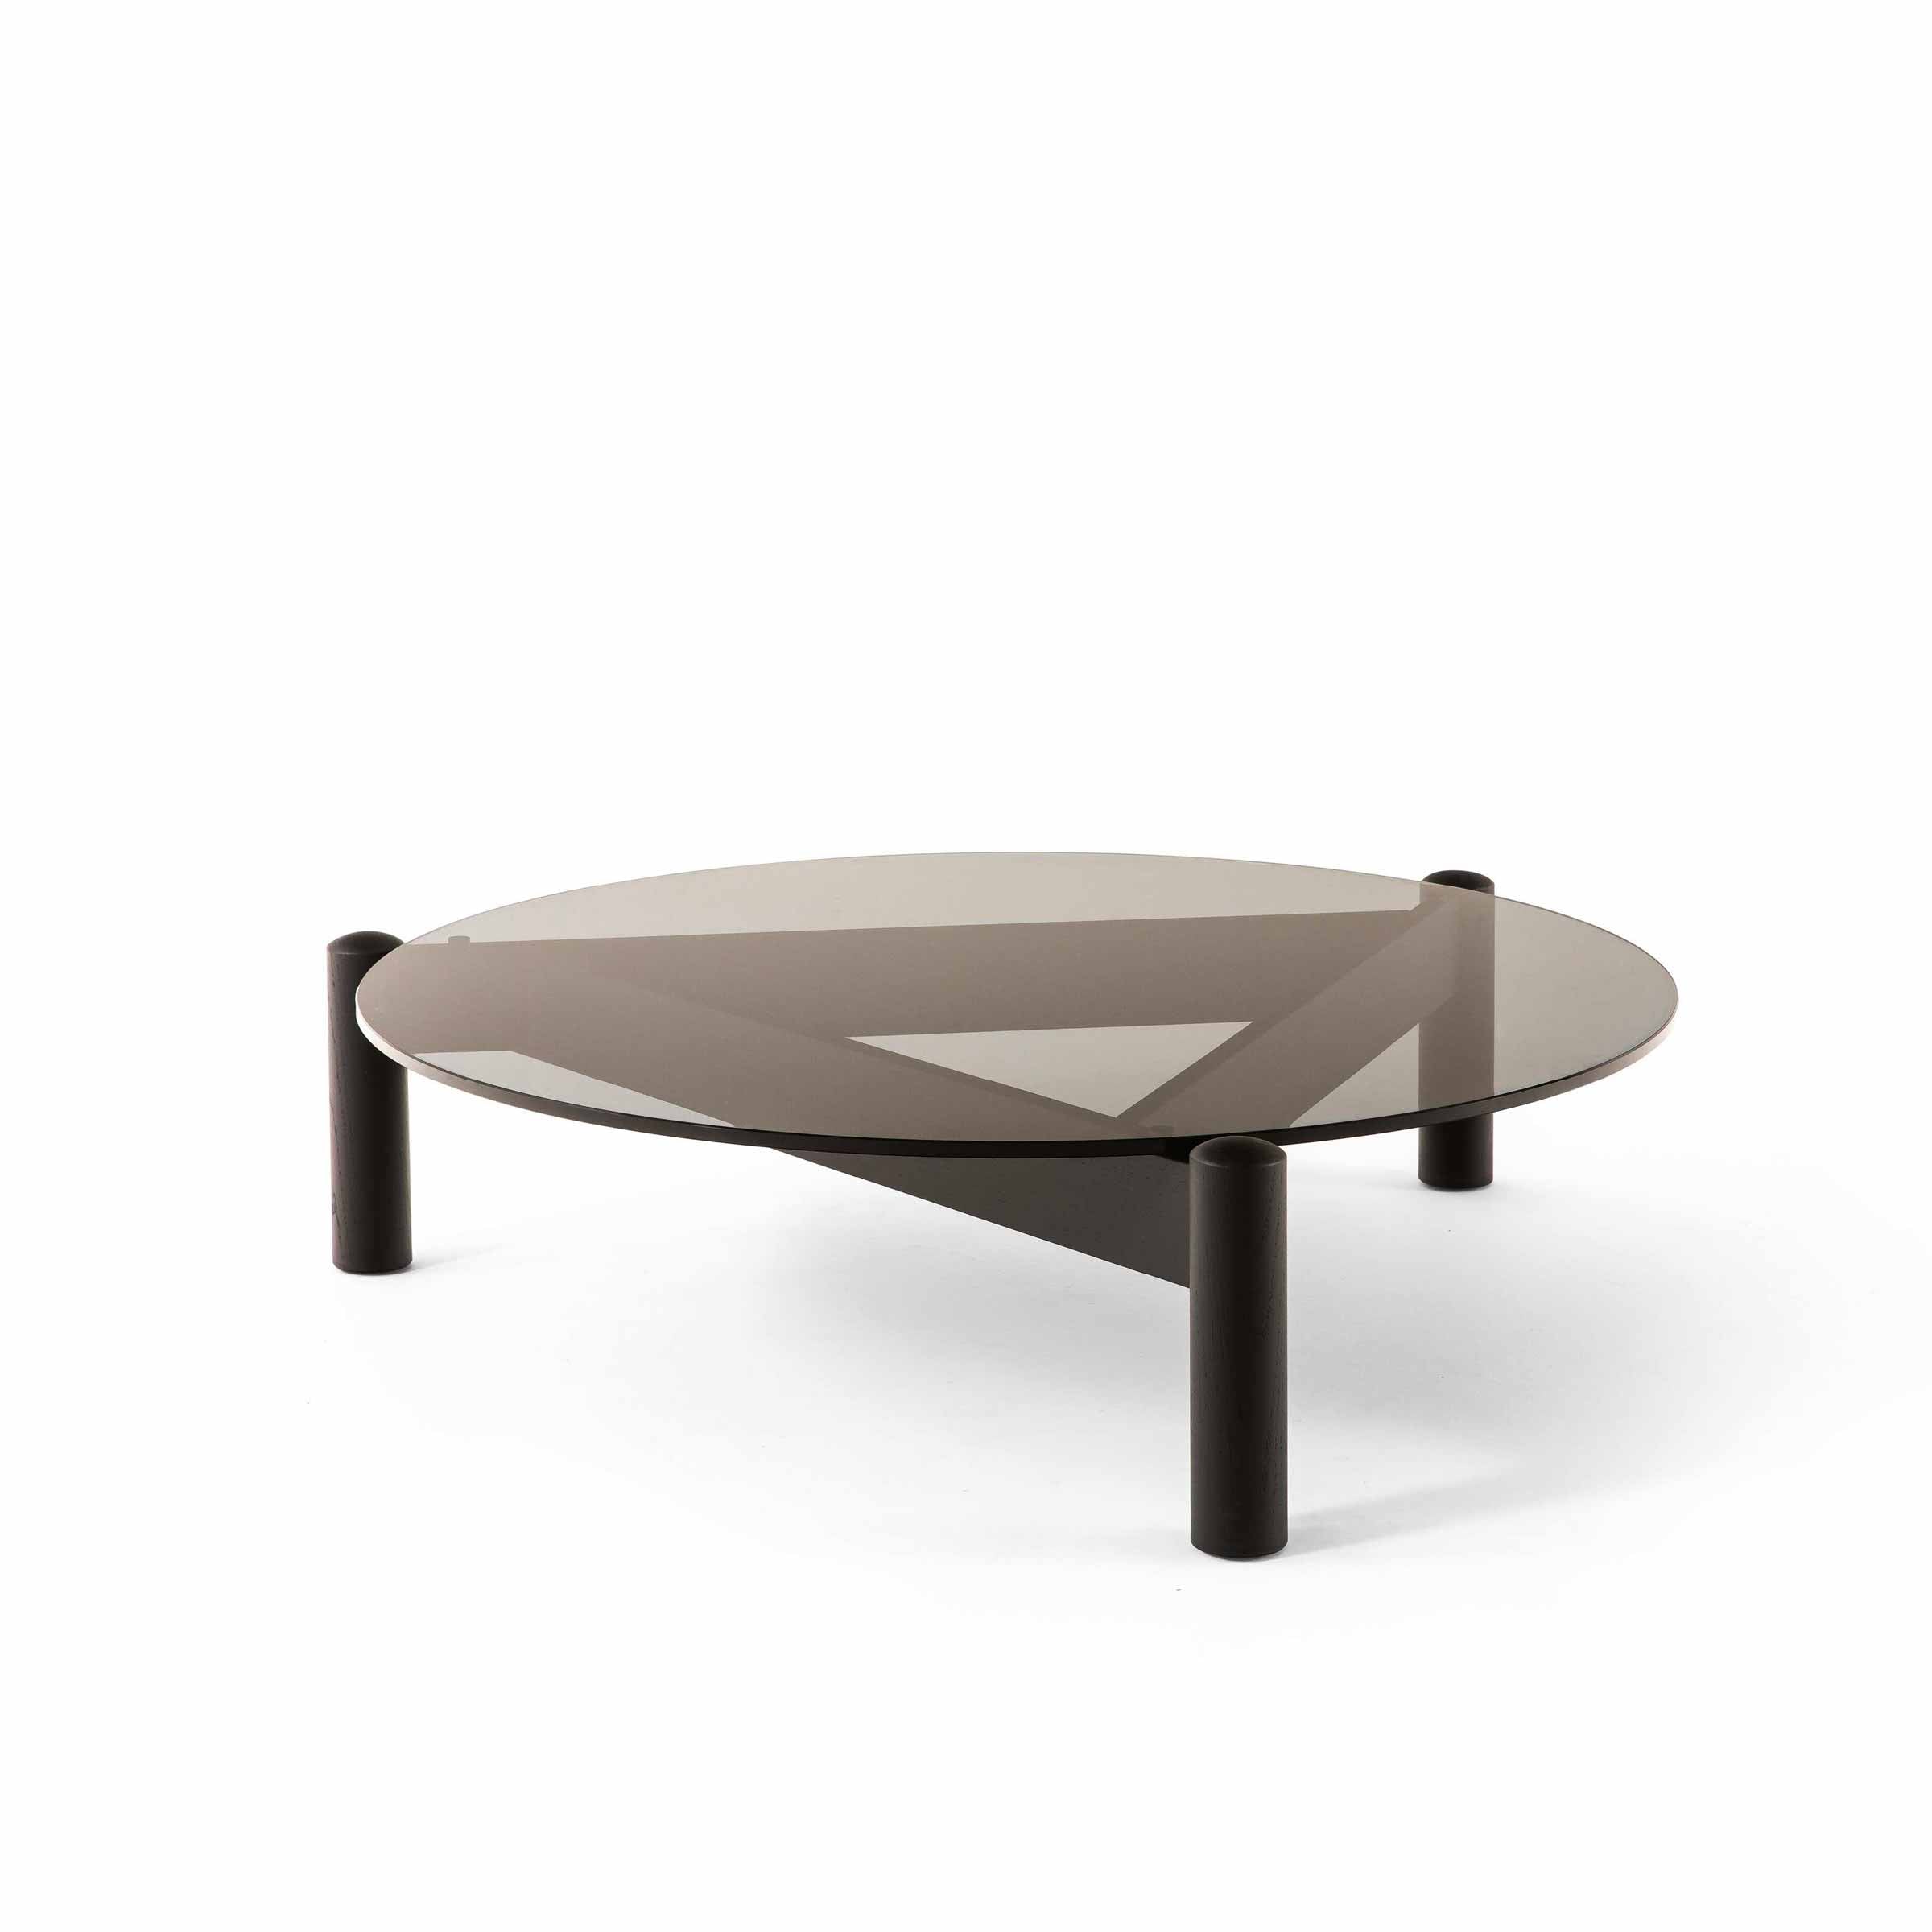 Charlotte Perriand - Cassina - Coffee table (1) - MEXIQUE - Catawiki